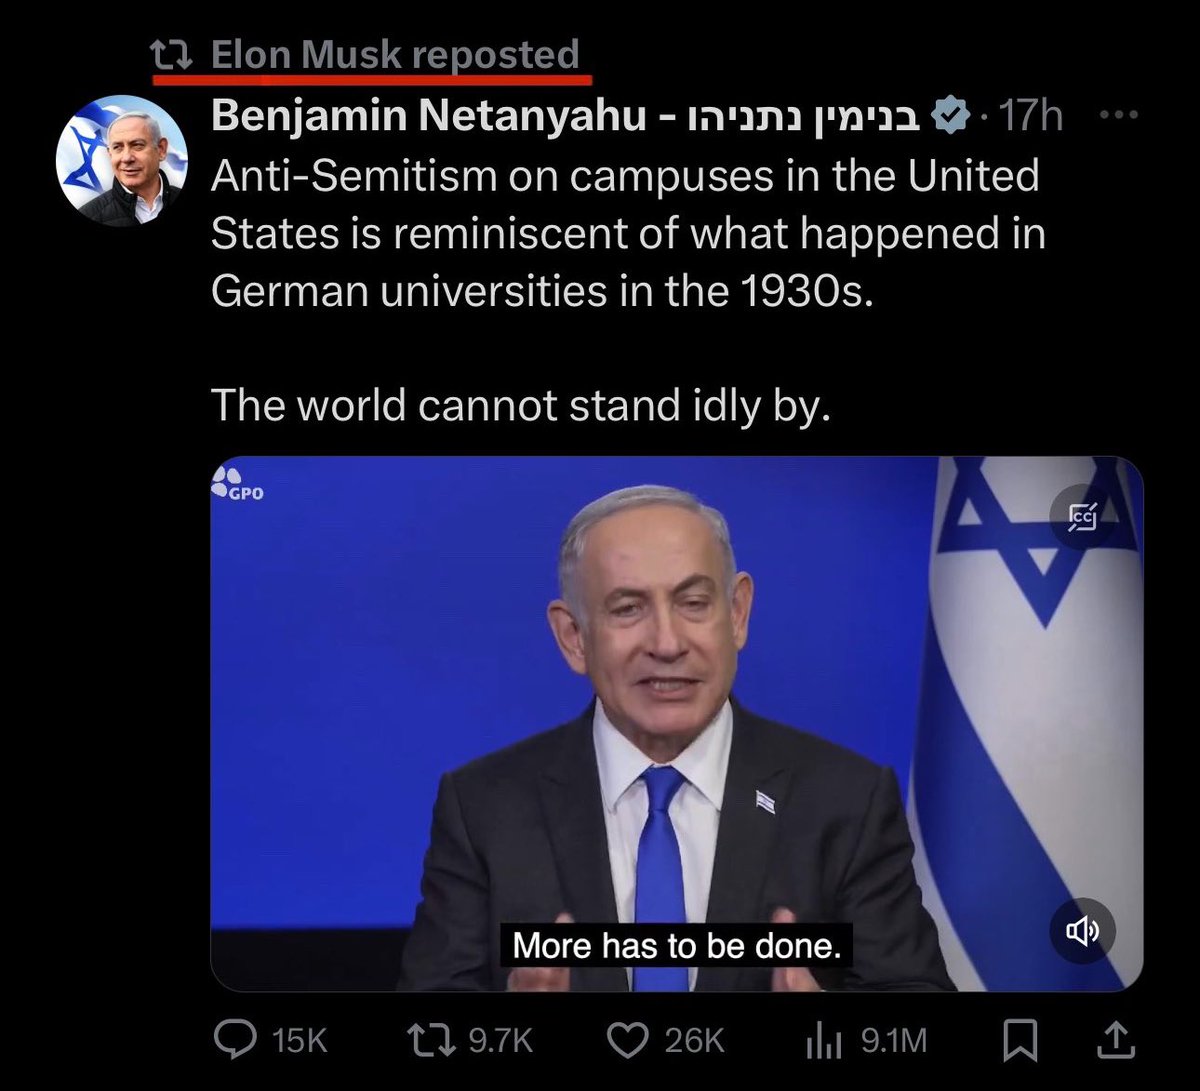 THE POWER OF THE ZIONIST LOBBY This illustrates their power and control. The man who has been at the forefront of the fight for Free Speech retweets a video in which Netanyahu calls for the banning of Free Speech among college students. Last week, @elonmusk was prepared to take…